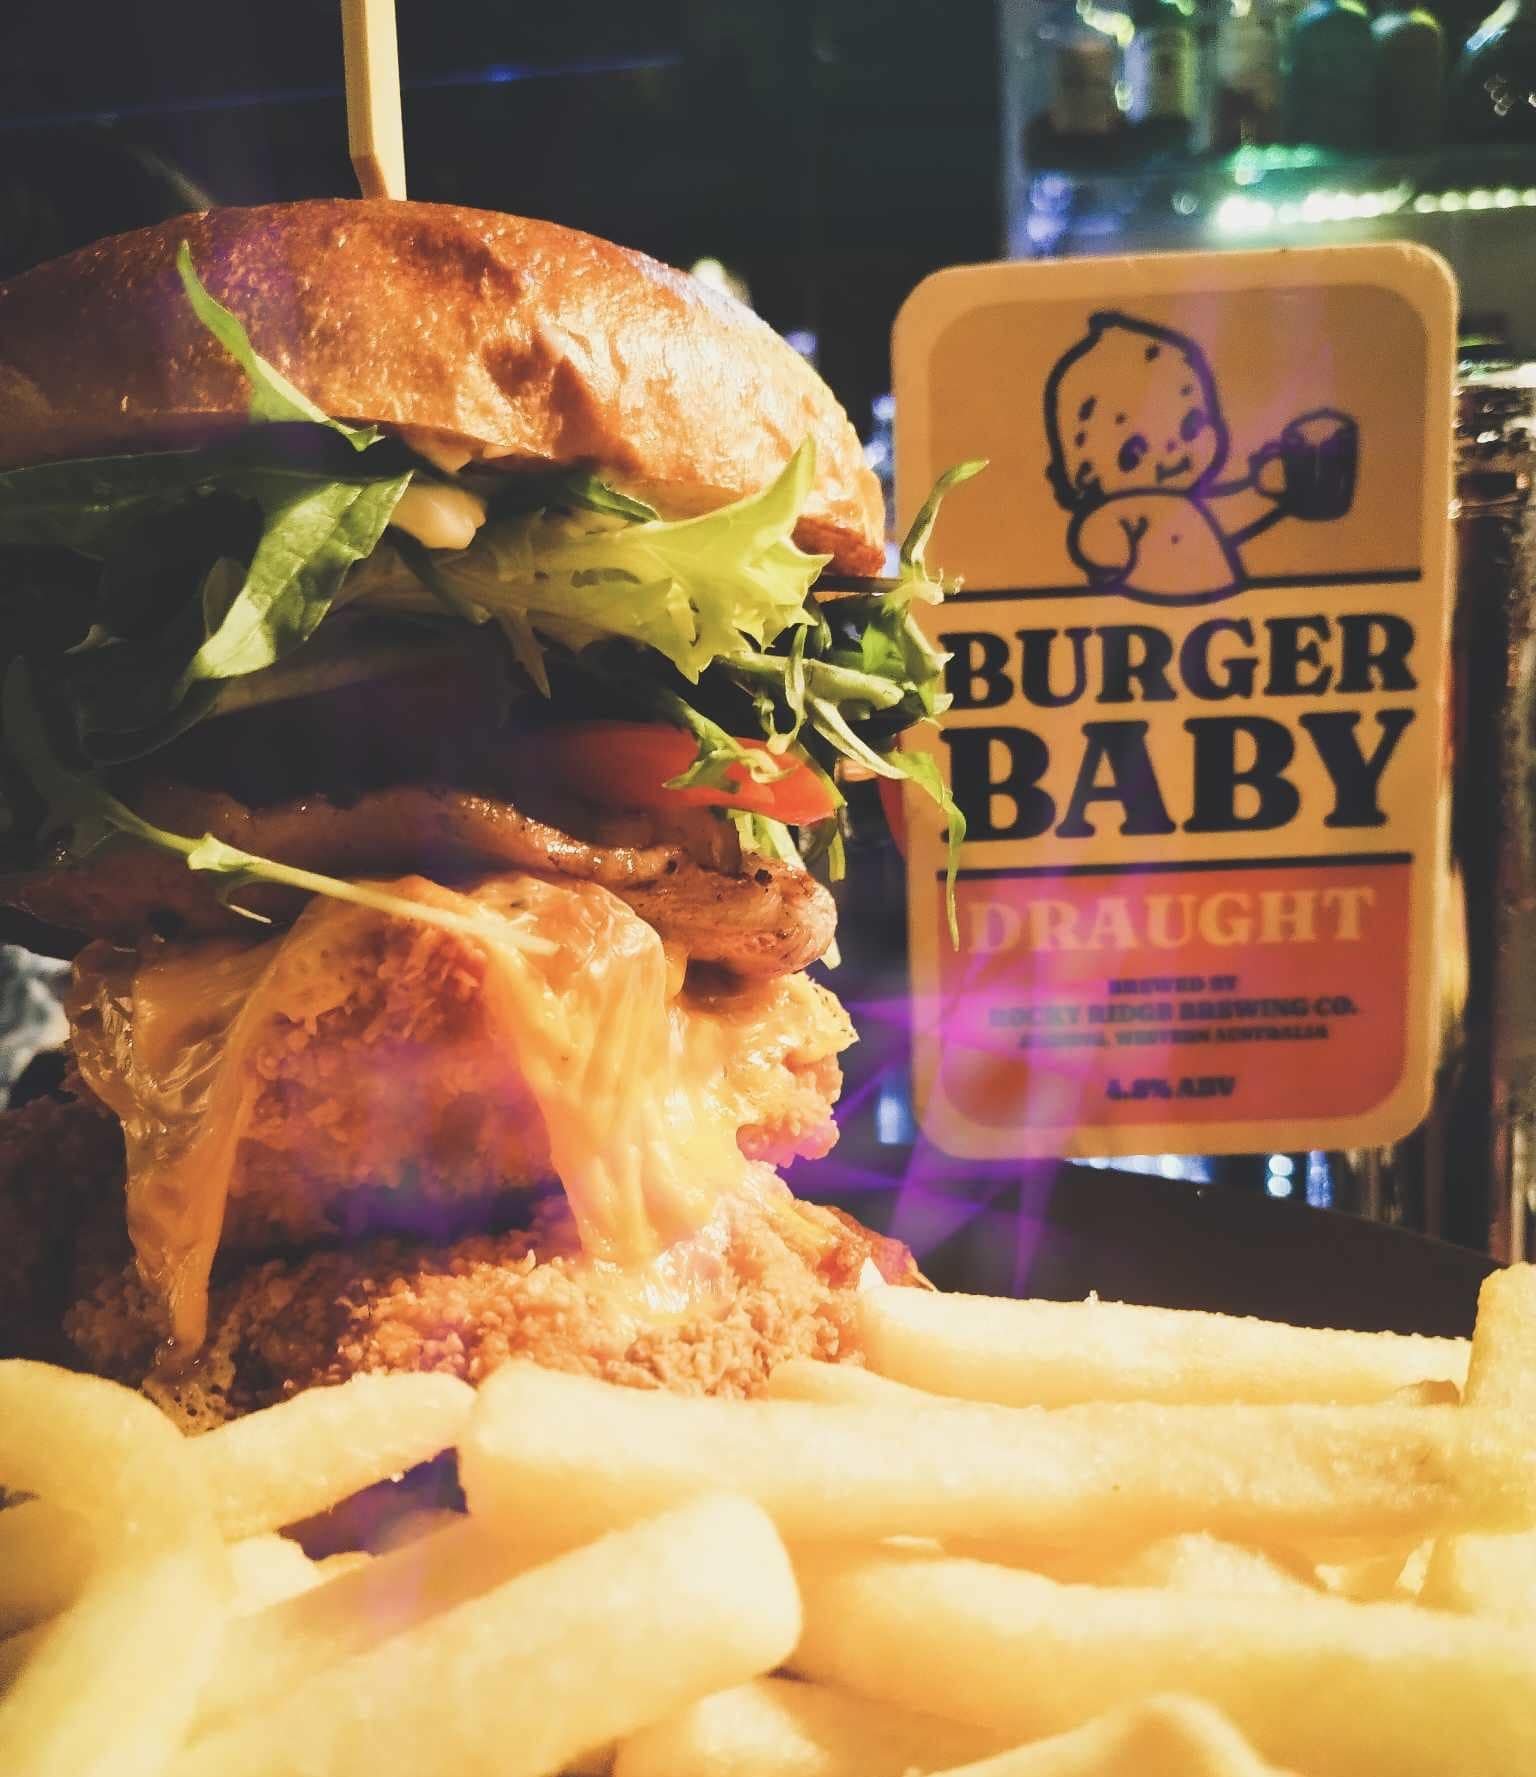 BOD this week
Double crunch chicken, grilled pineapple &amp; bacon, topped w fresh greens, tomato, house mayo mmmmmm Make it more delicious and have it with a pint of our Burger baby draught Burger Baby Margaret River, Western Australia Doust's Corne